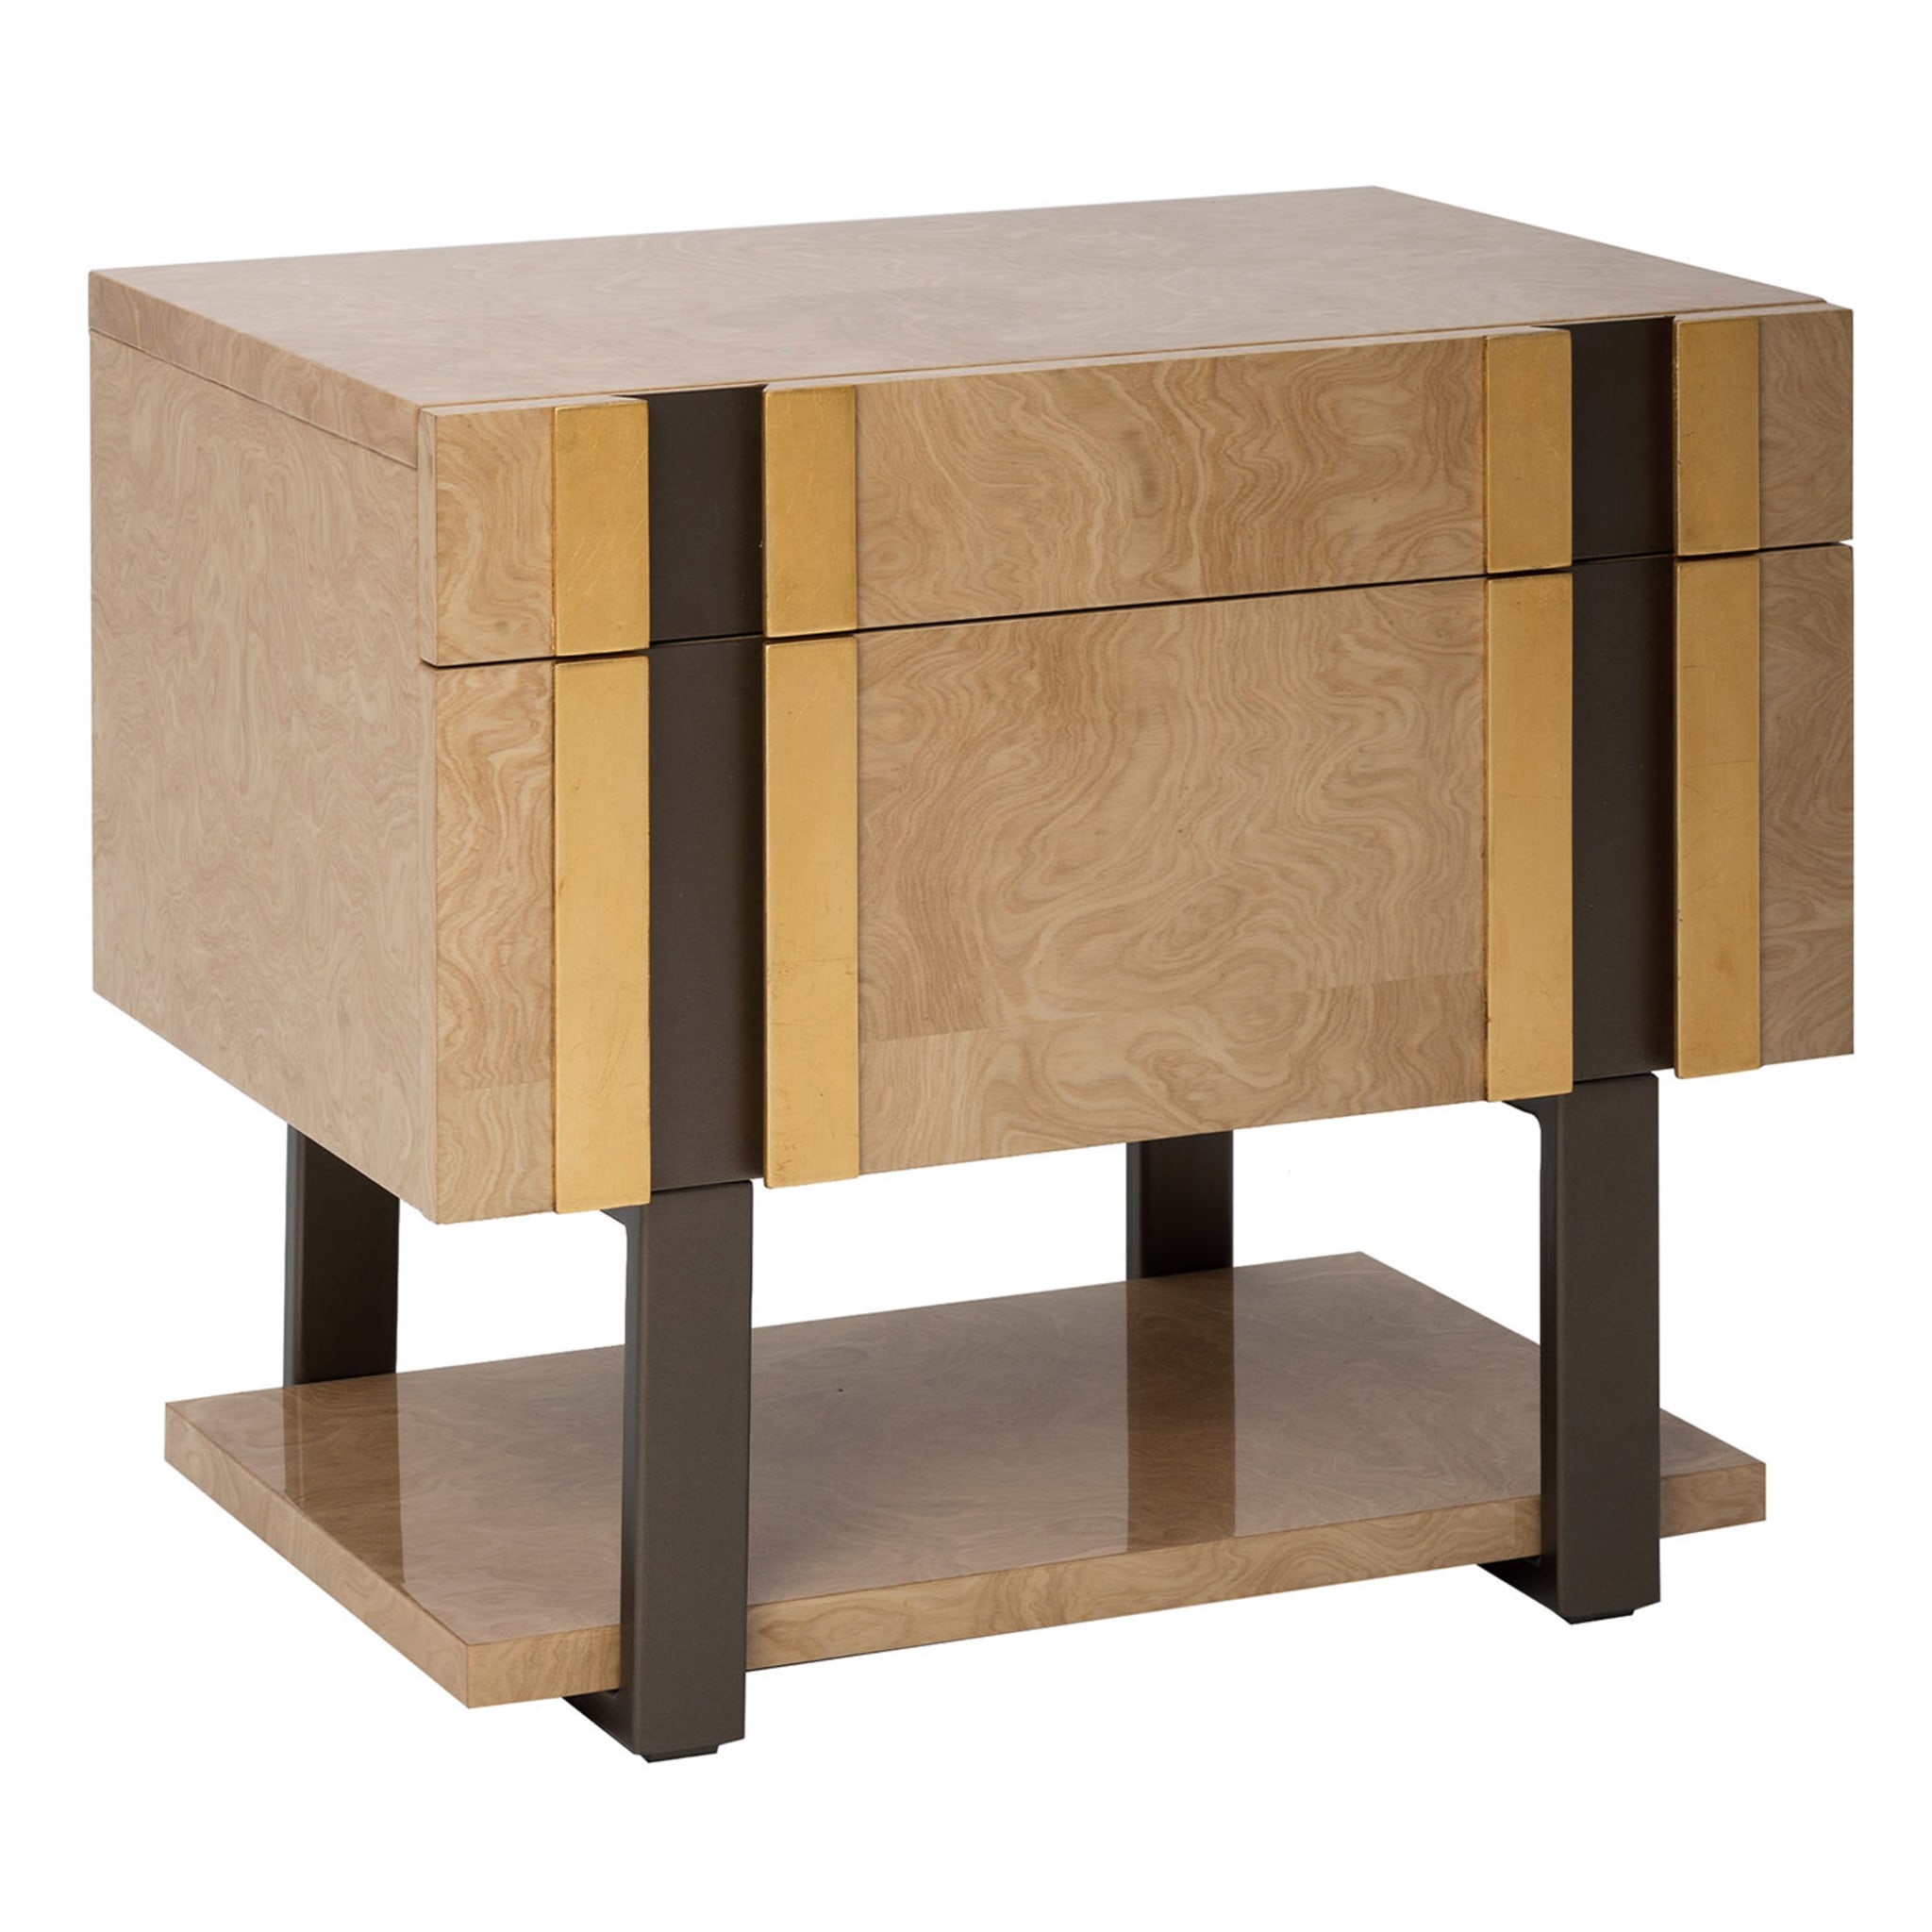 Diadema Bedside Table by Marco and Giulio Mantellassi - Main view